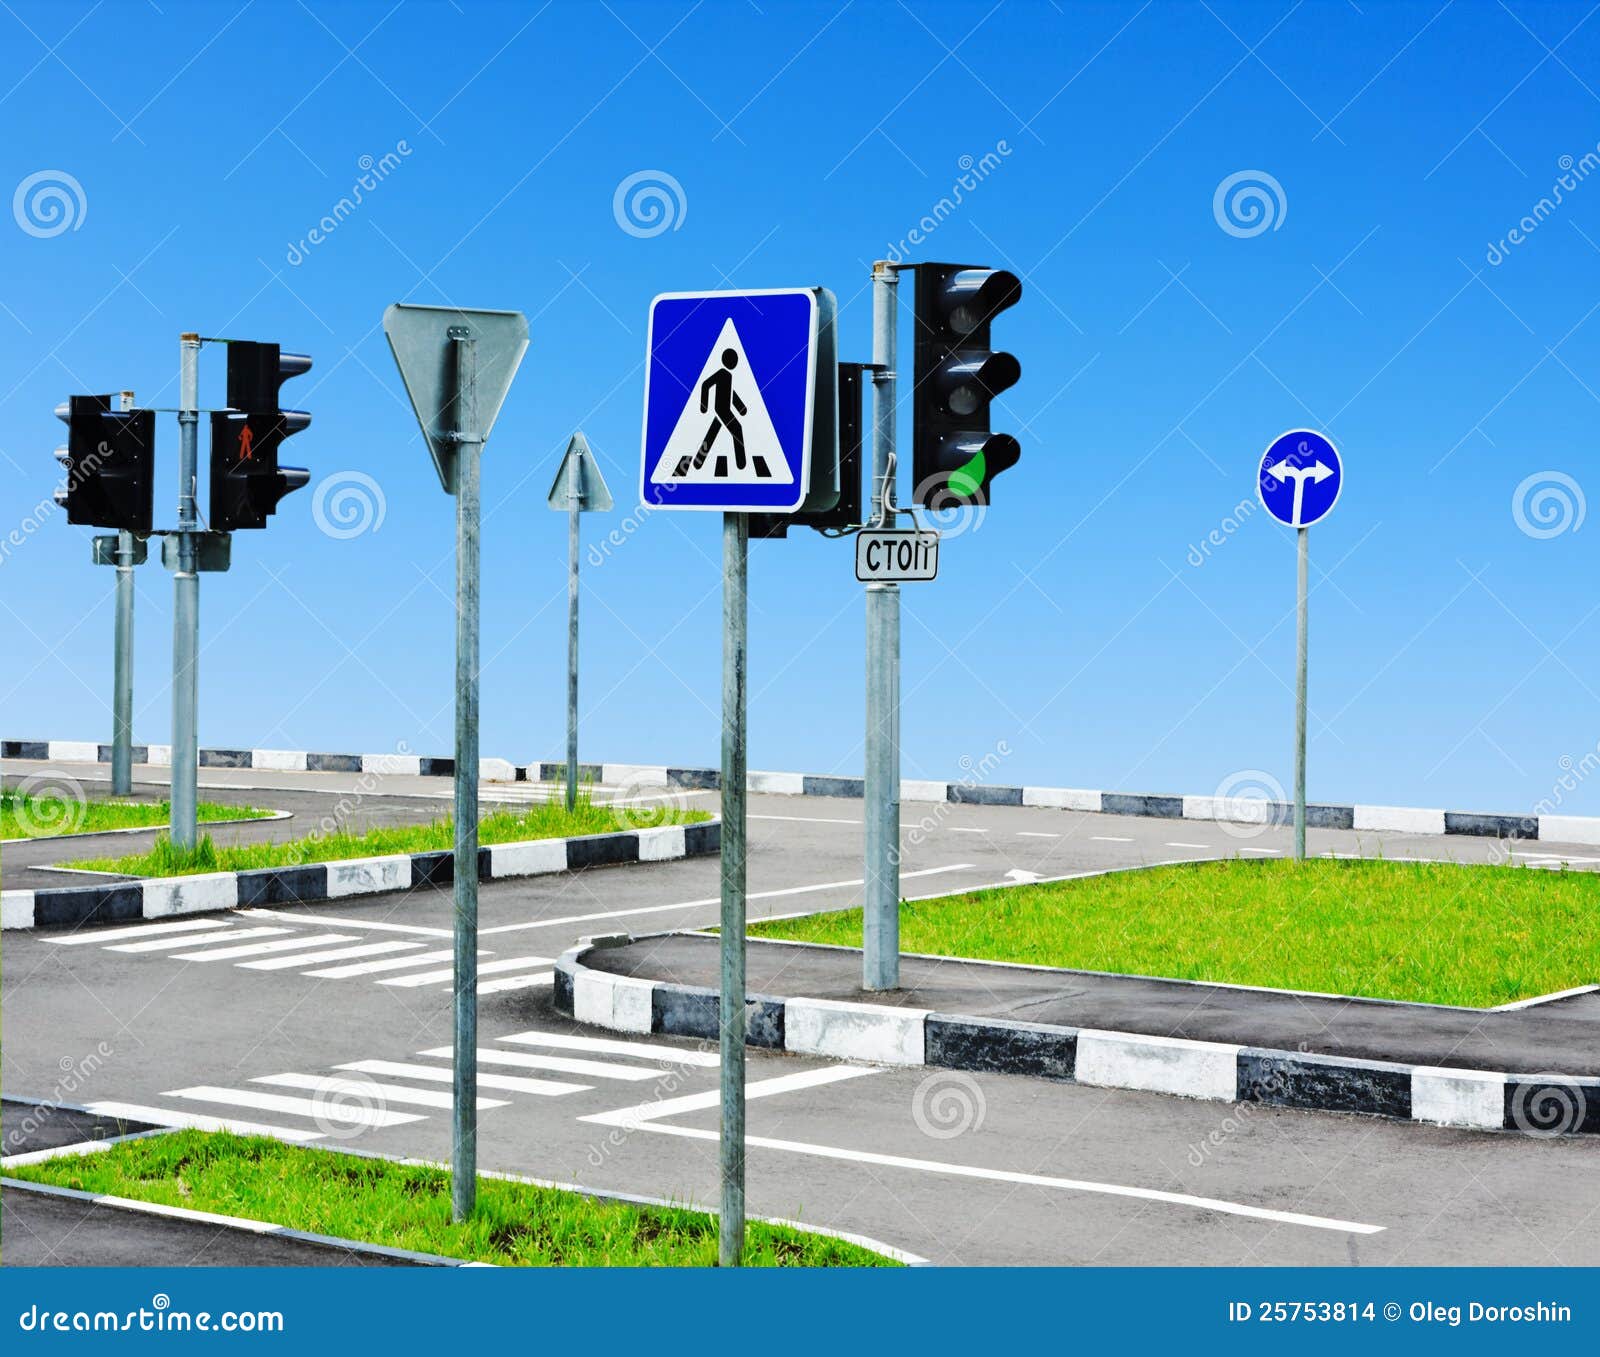 Street Intersection And Road Stock Images - Image: 25753814